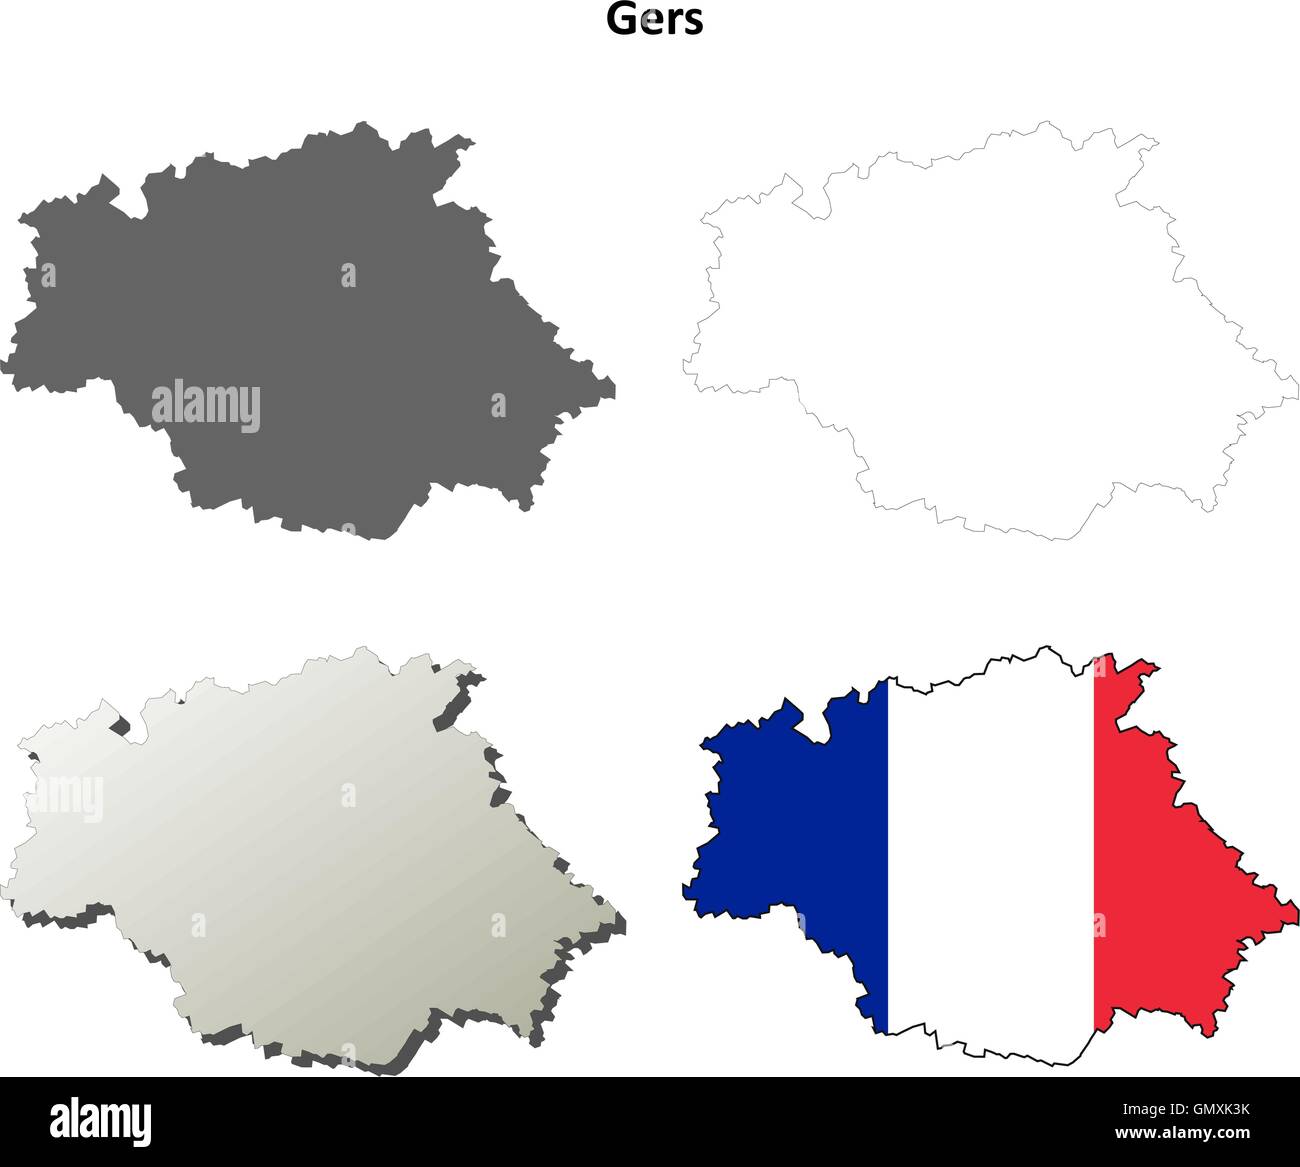 Gers, Midi-Pyrenees outline map set Stock Vector